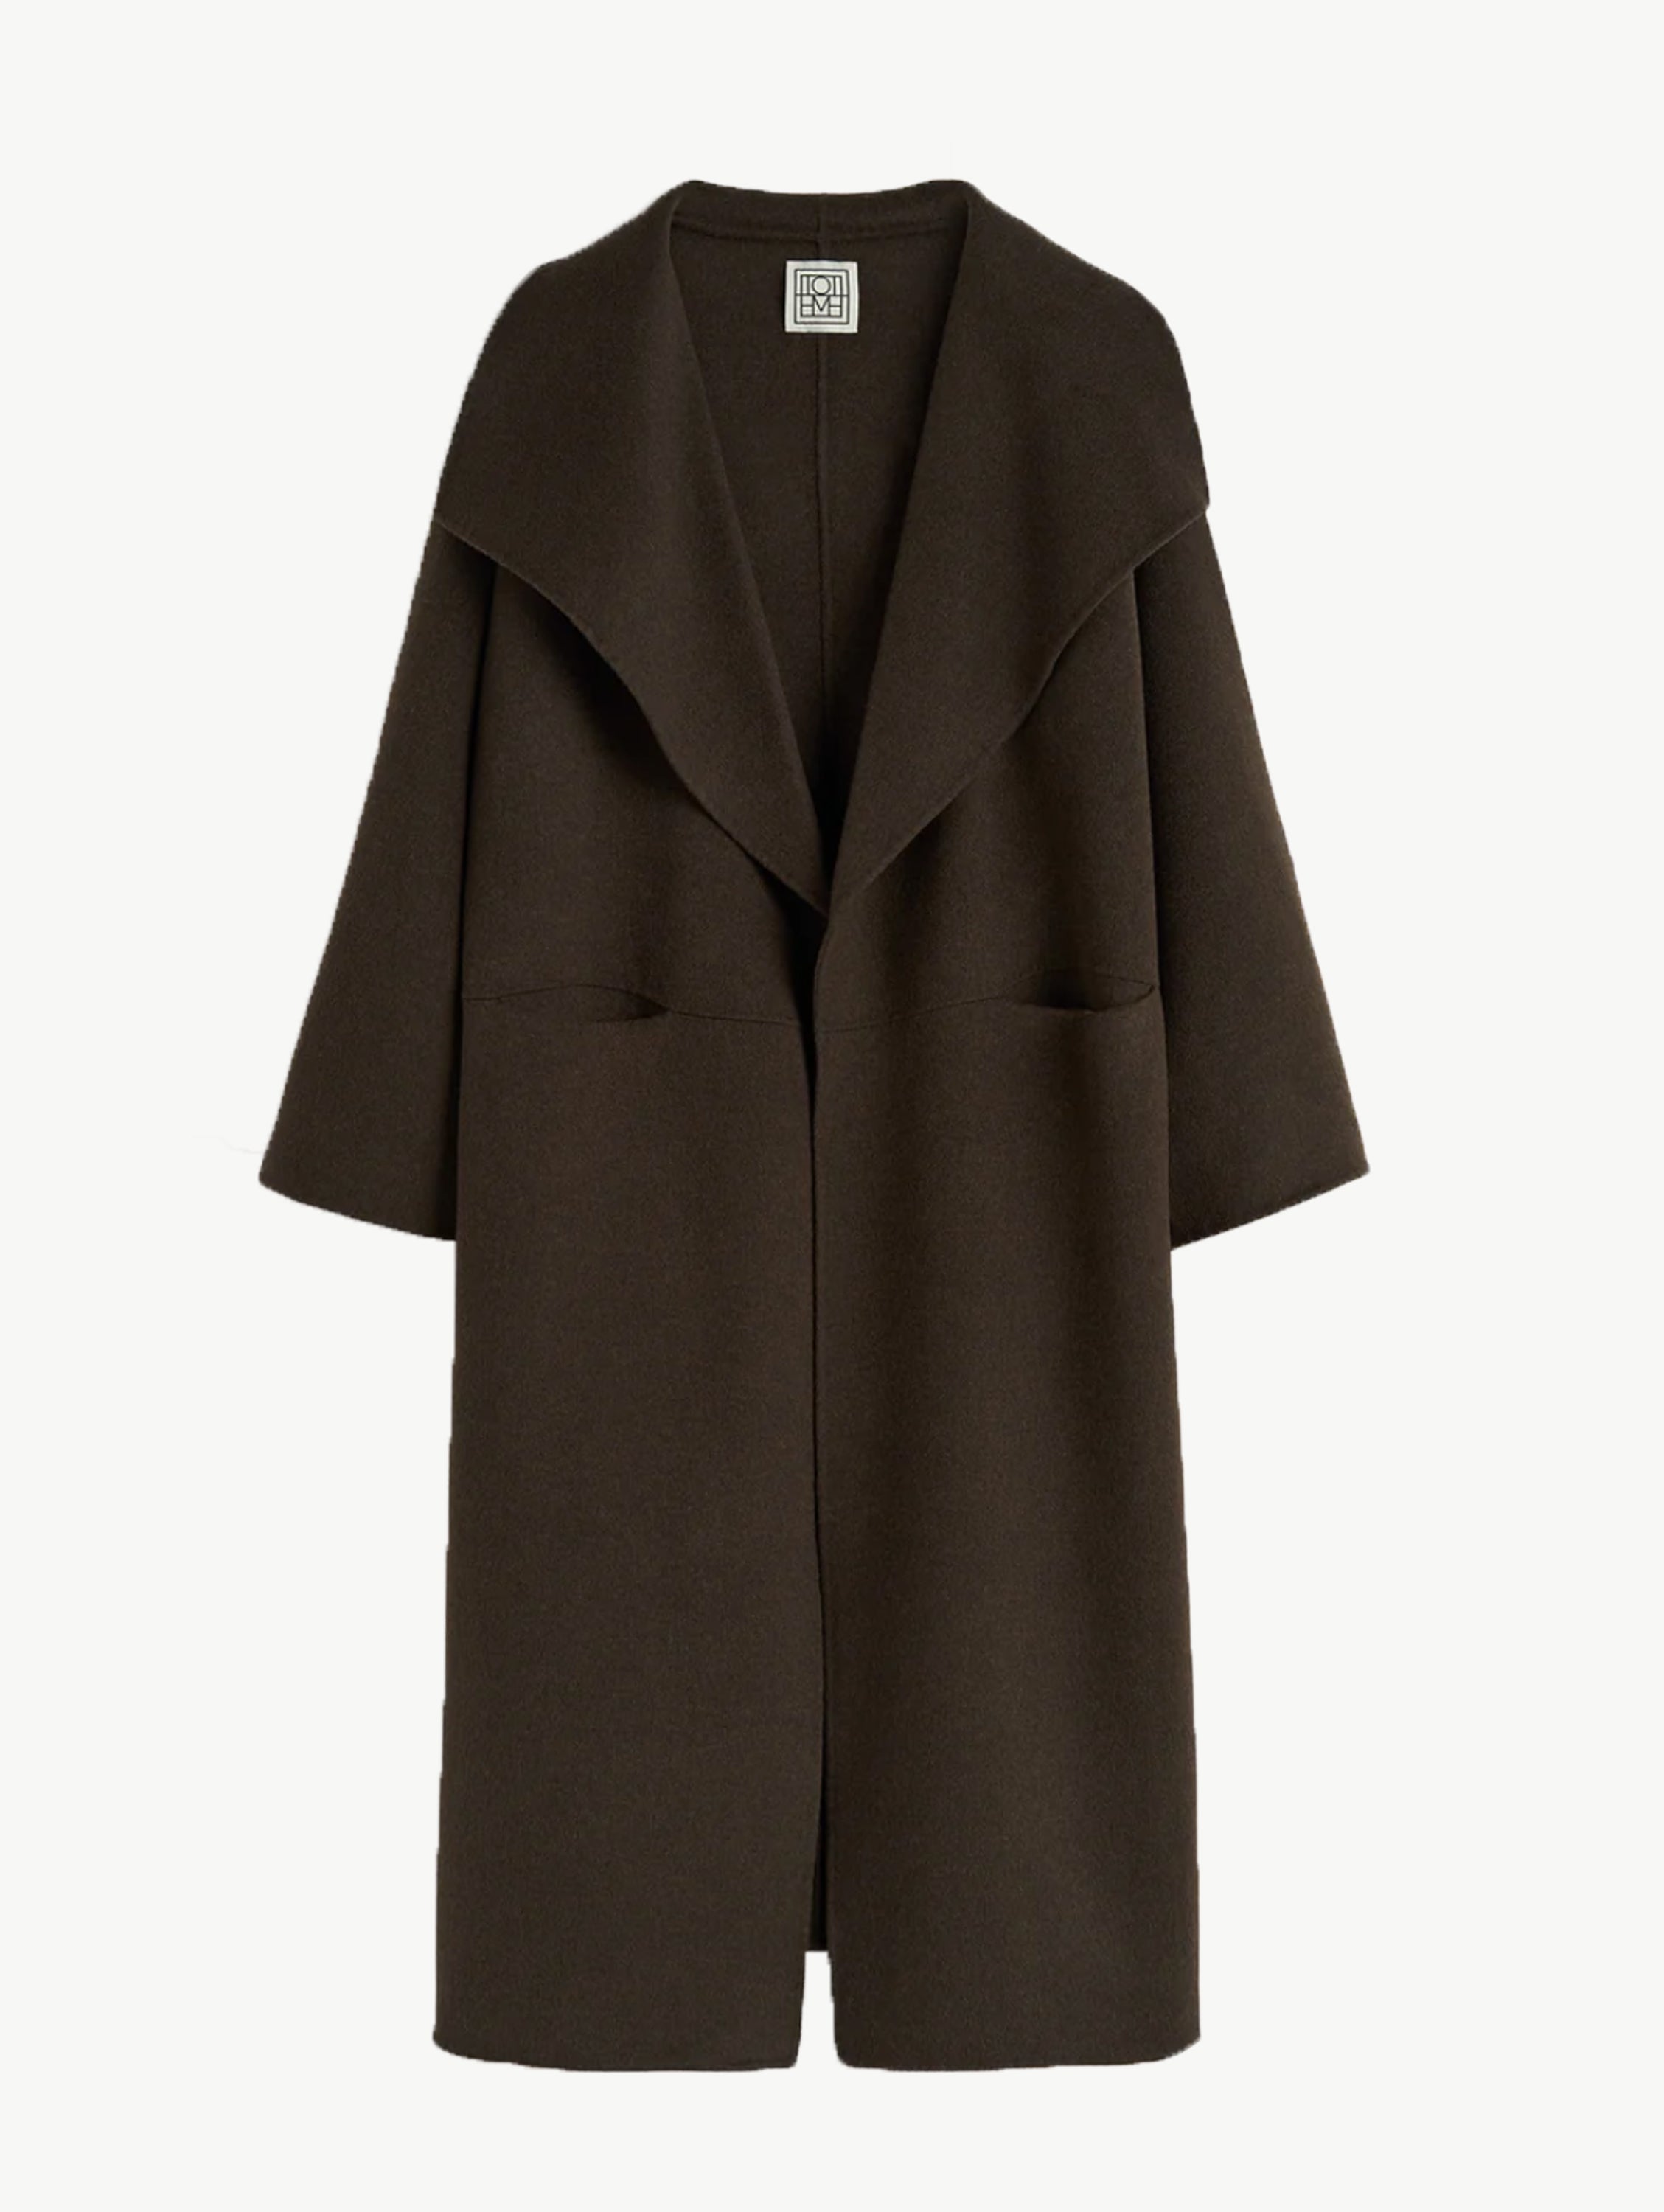 Wool and cashmere Annecy coat